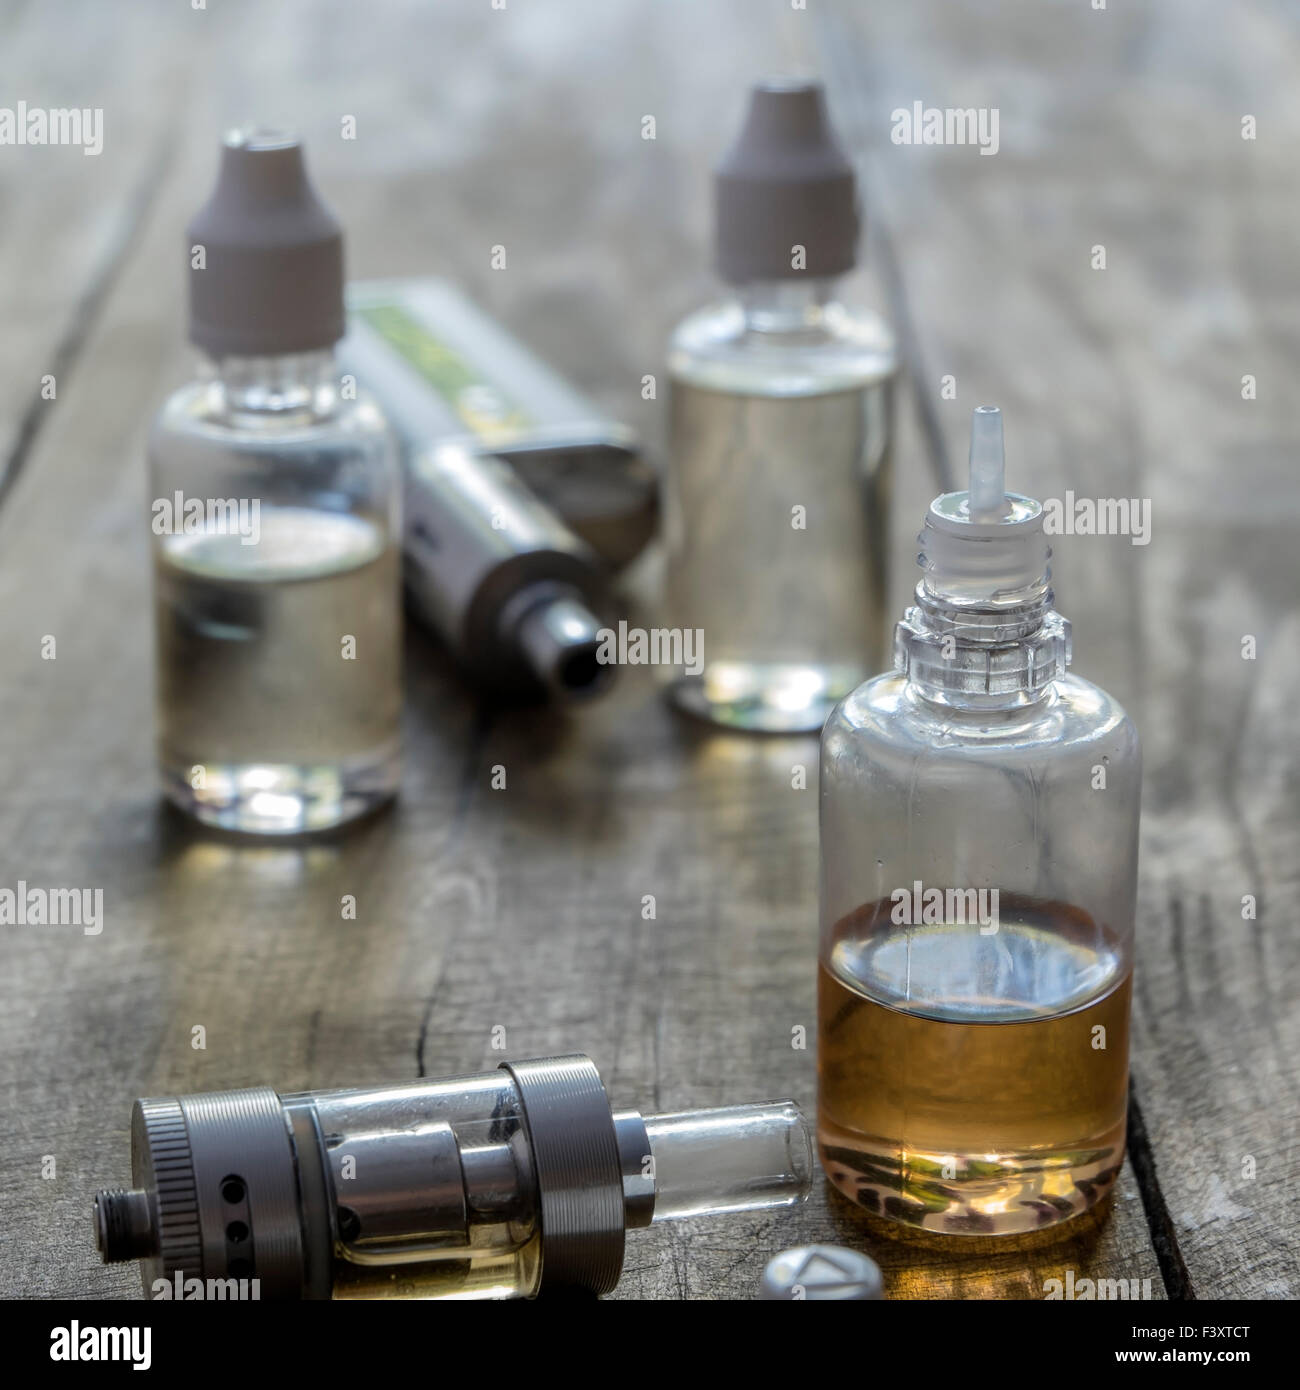 e-cigarettes with different re-fill bottles, close up Stock Photo